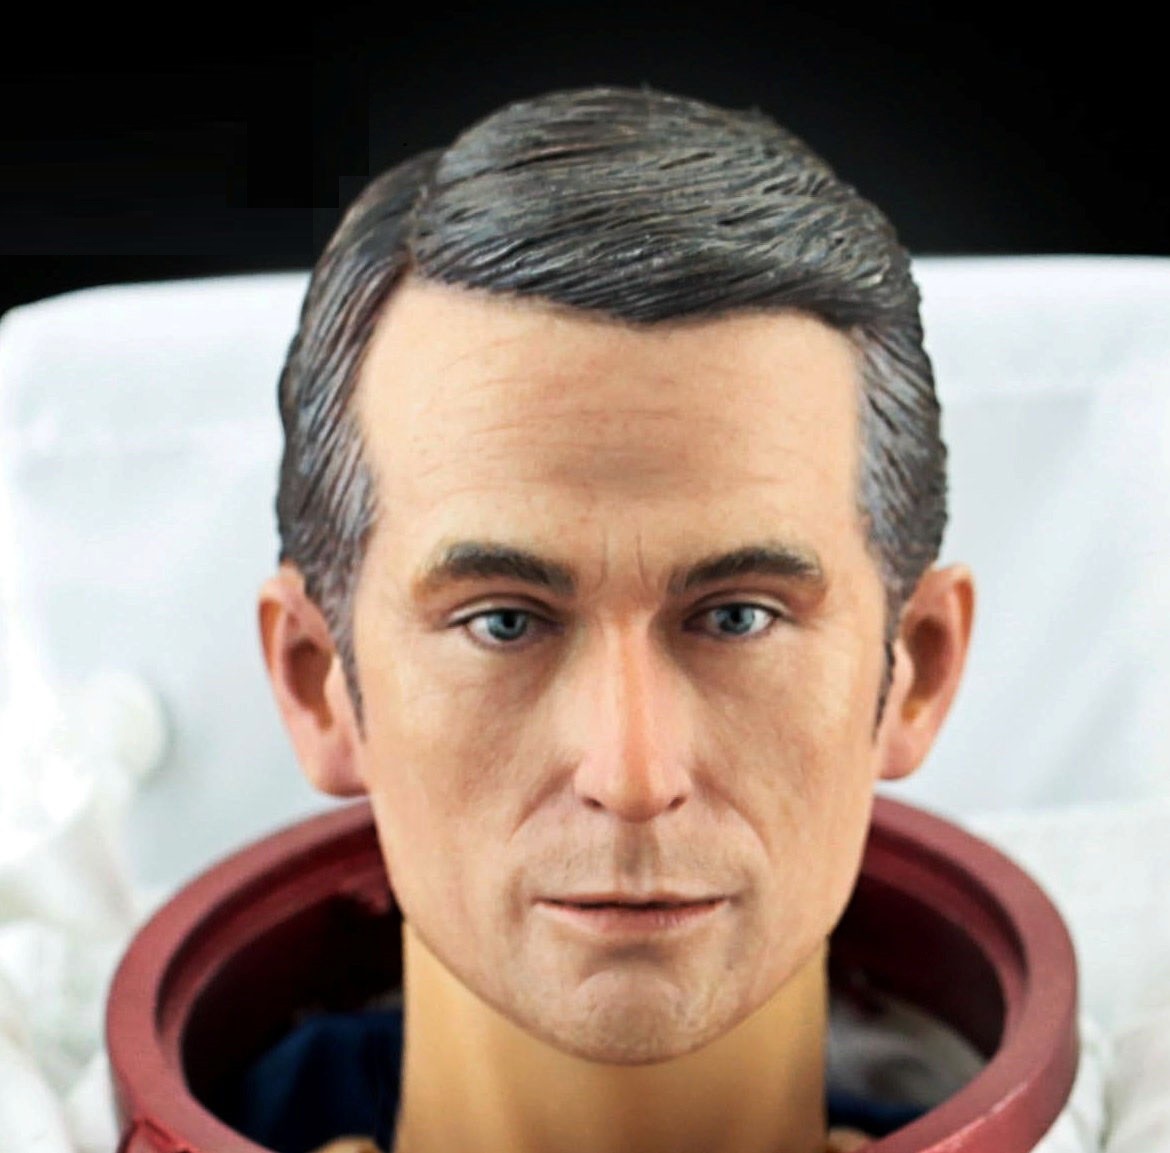 ... Captain <b>Eugene Cernan</b> Last man on the Moon HF0003 Hobby Master Scale 1:6 ... - hf0003_captain_eugene_cernan_last_man_on_the_moon_fully_articulated_action_figure_by_hobby_master_1-6_scale_model_eztoys